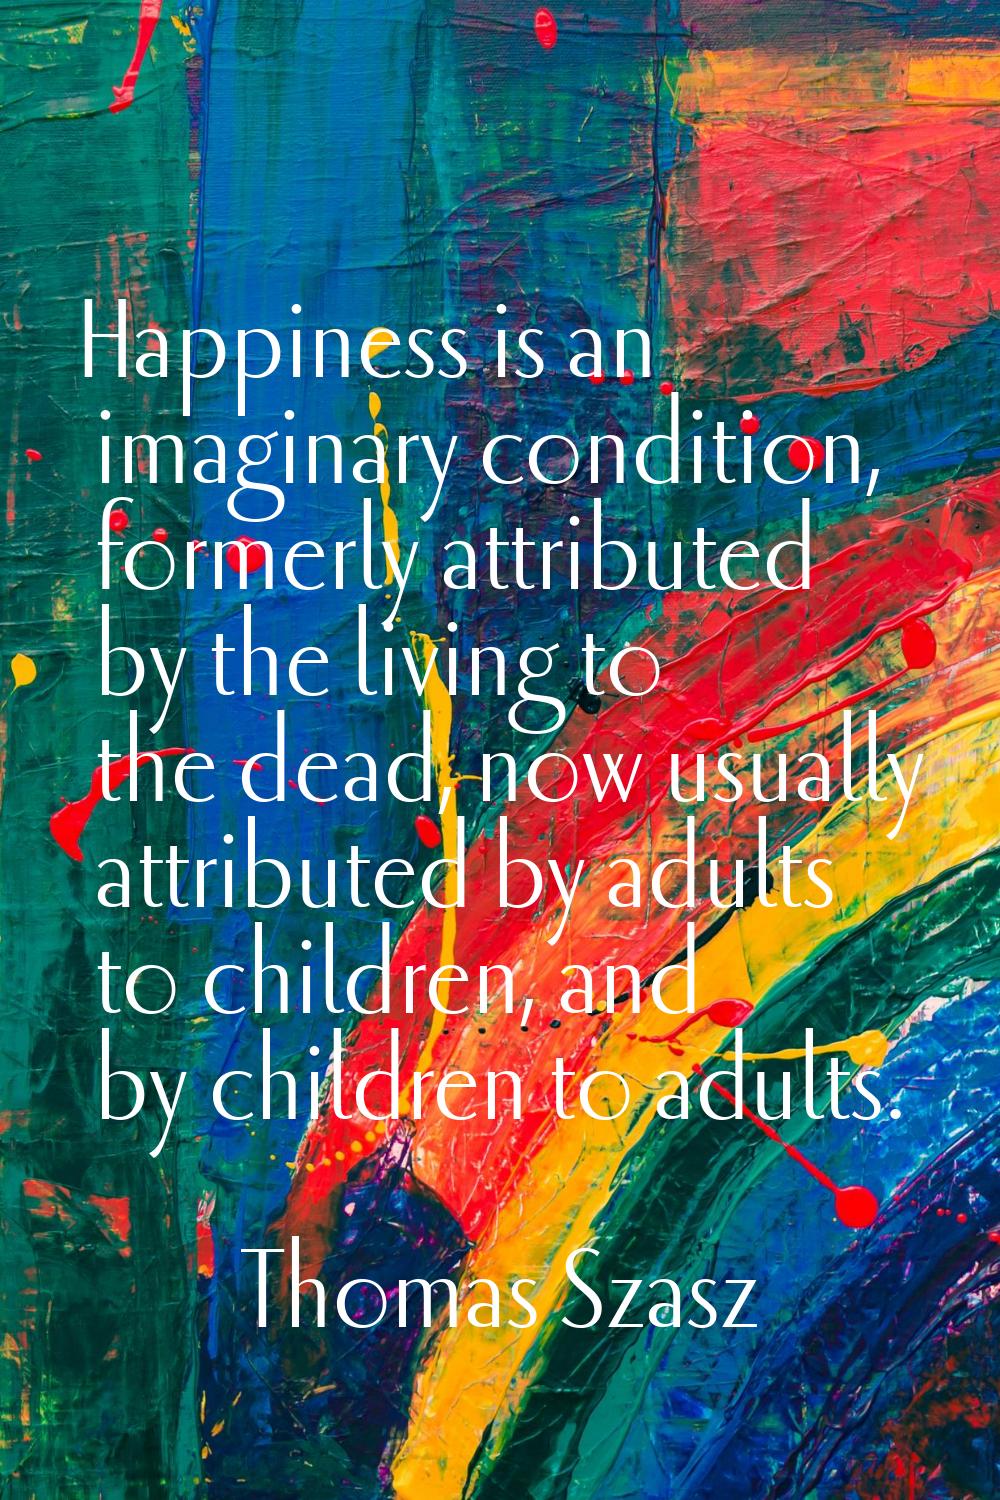 Happiness is an imaginary condition, formerly attributed by the living to the dead, now usually att